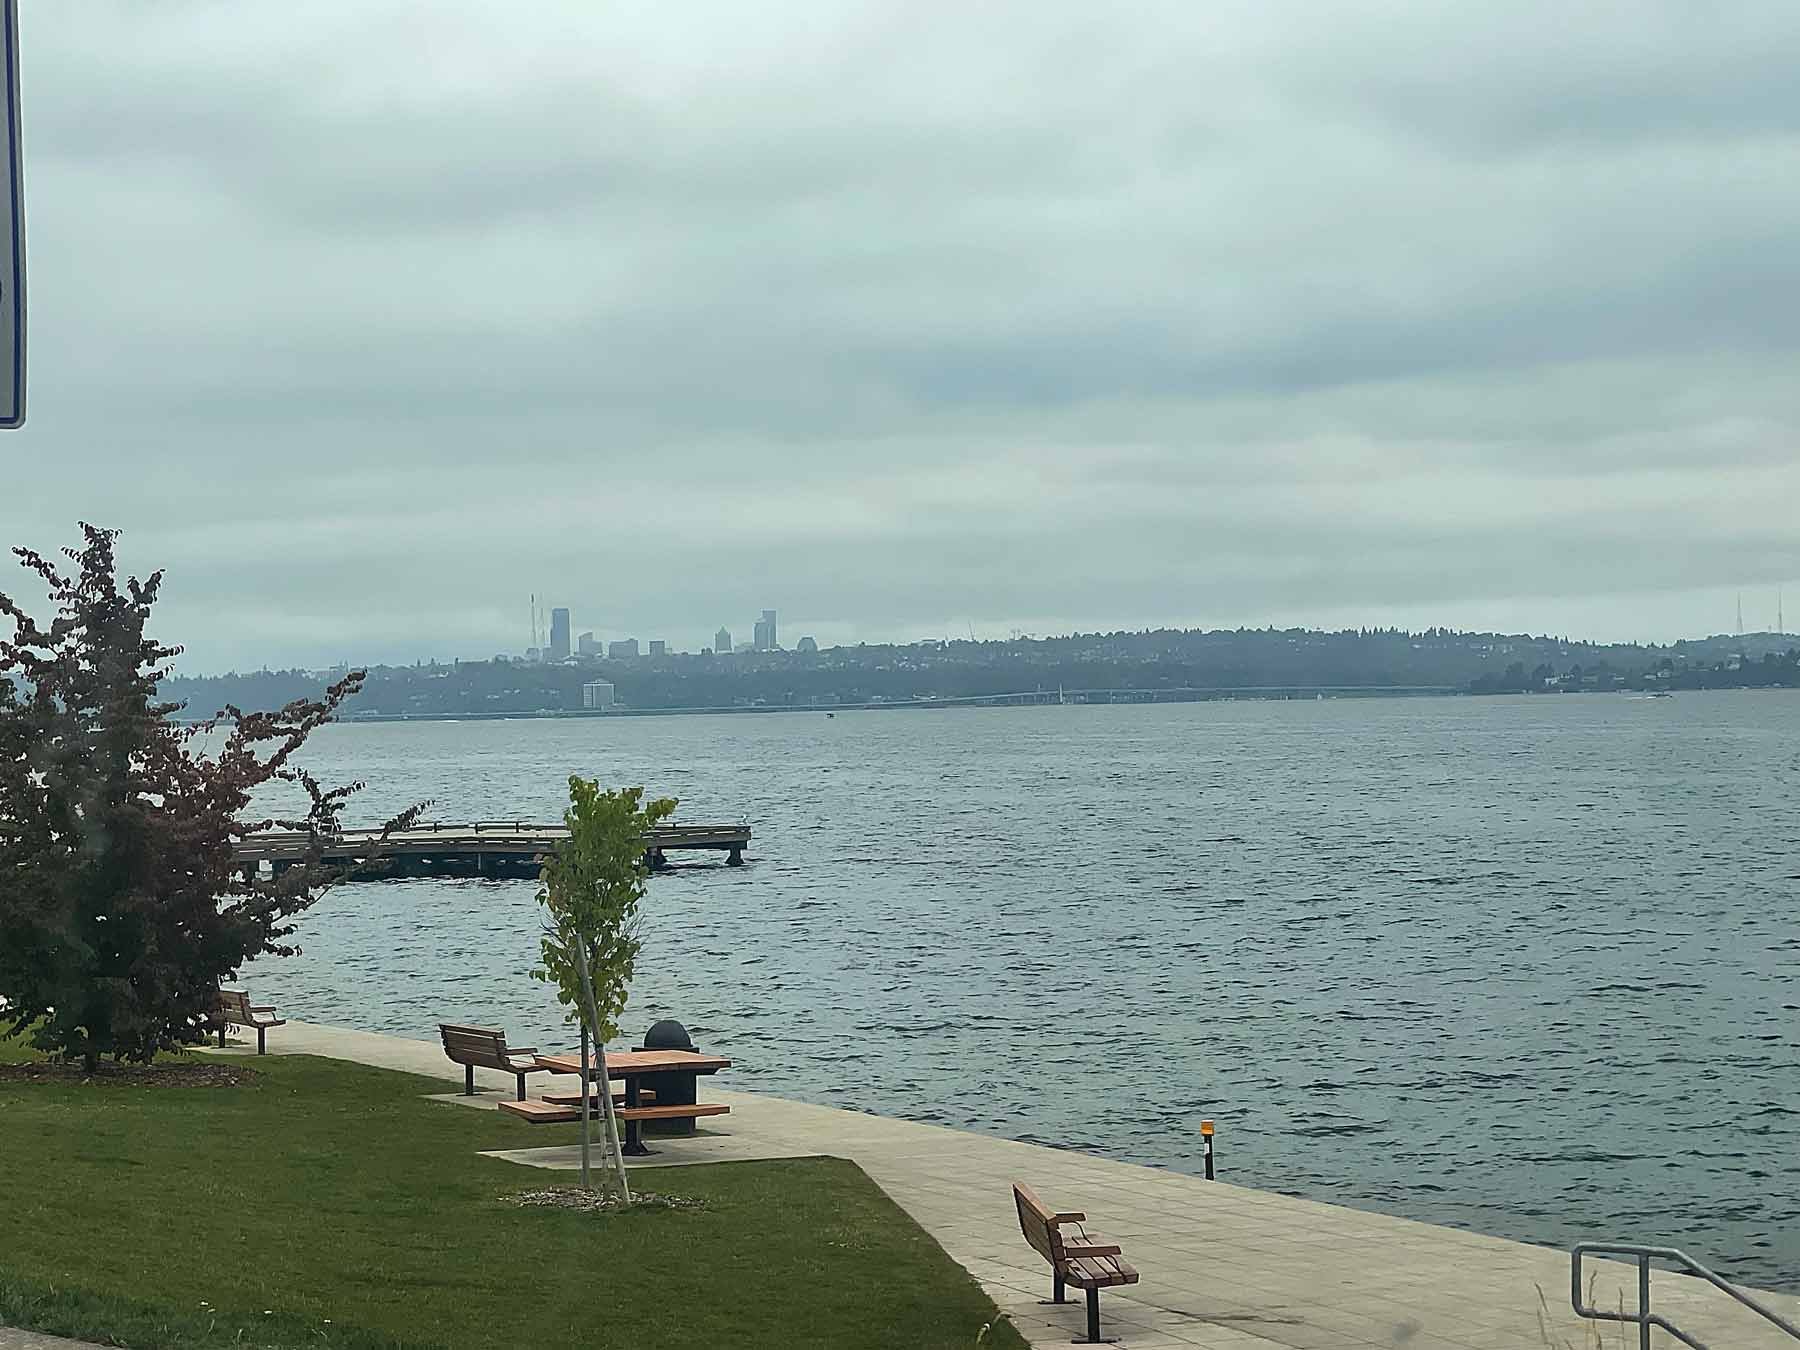 David E Brink Park dock with view of lake washington and Seattle Skyline